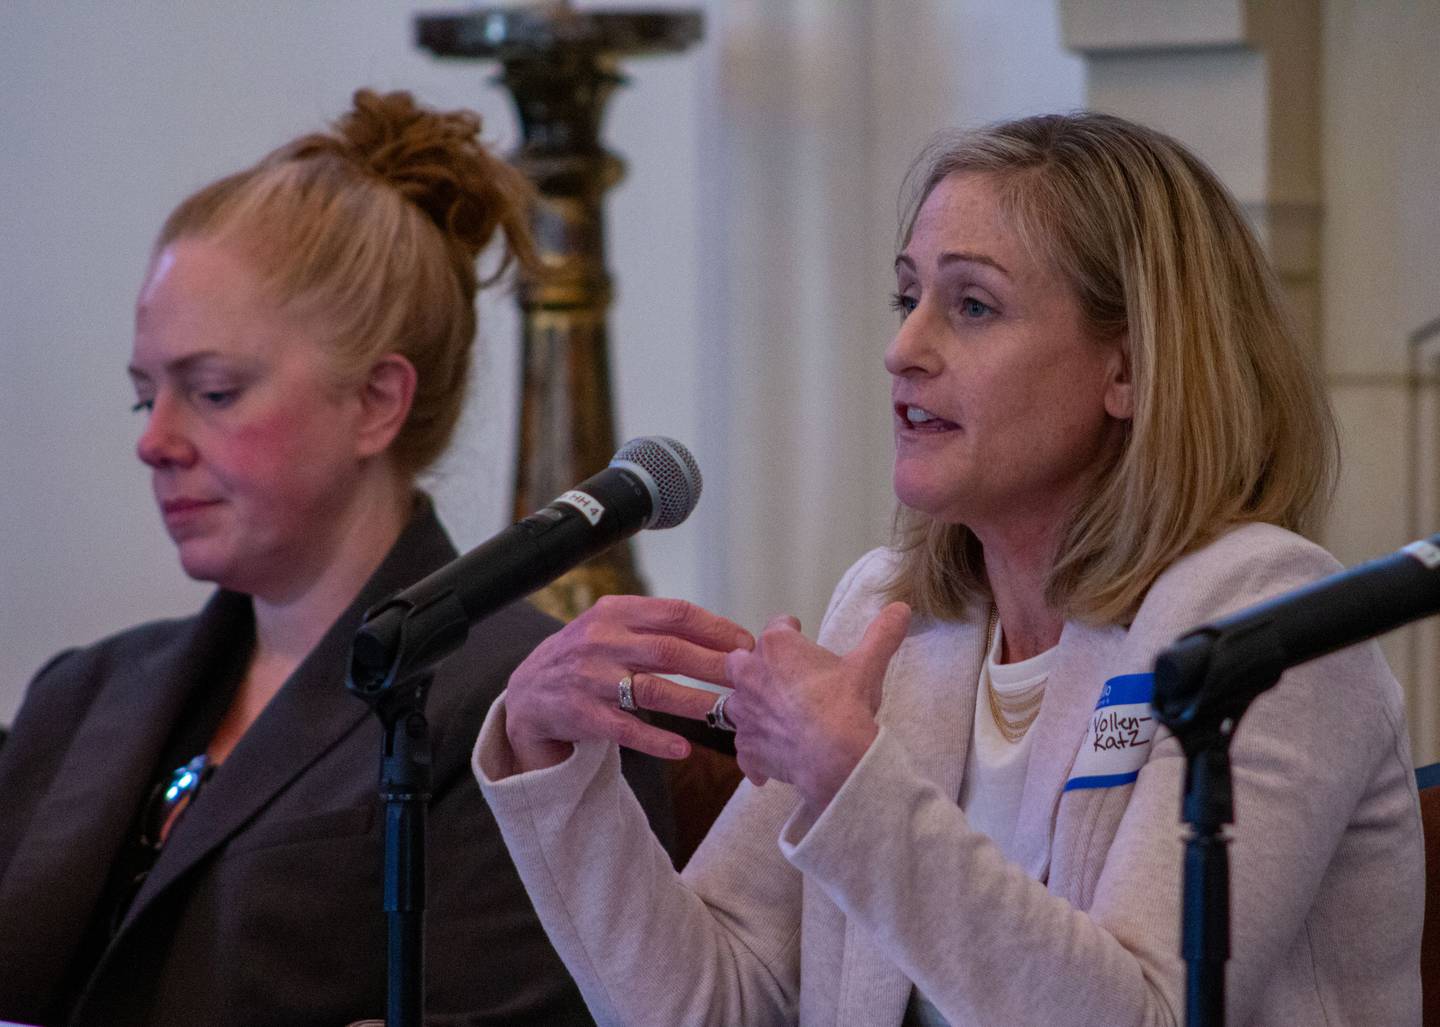 Jennifer Vollen-Katz (right), executive director of the John Howard Association, and Stephanie Kollmann, policy director at the Children and Family Justice Center within the Northwestern Bluhm Legal Clinic, speak at an Illinois Justice Project reentry event in Chicago in April. Vollen-Katz said local economies should not hinge on the existence of prisons.